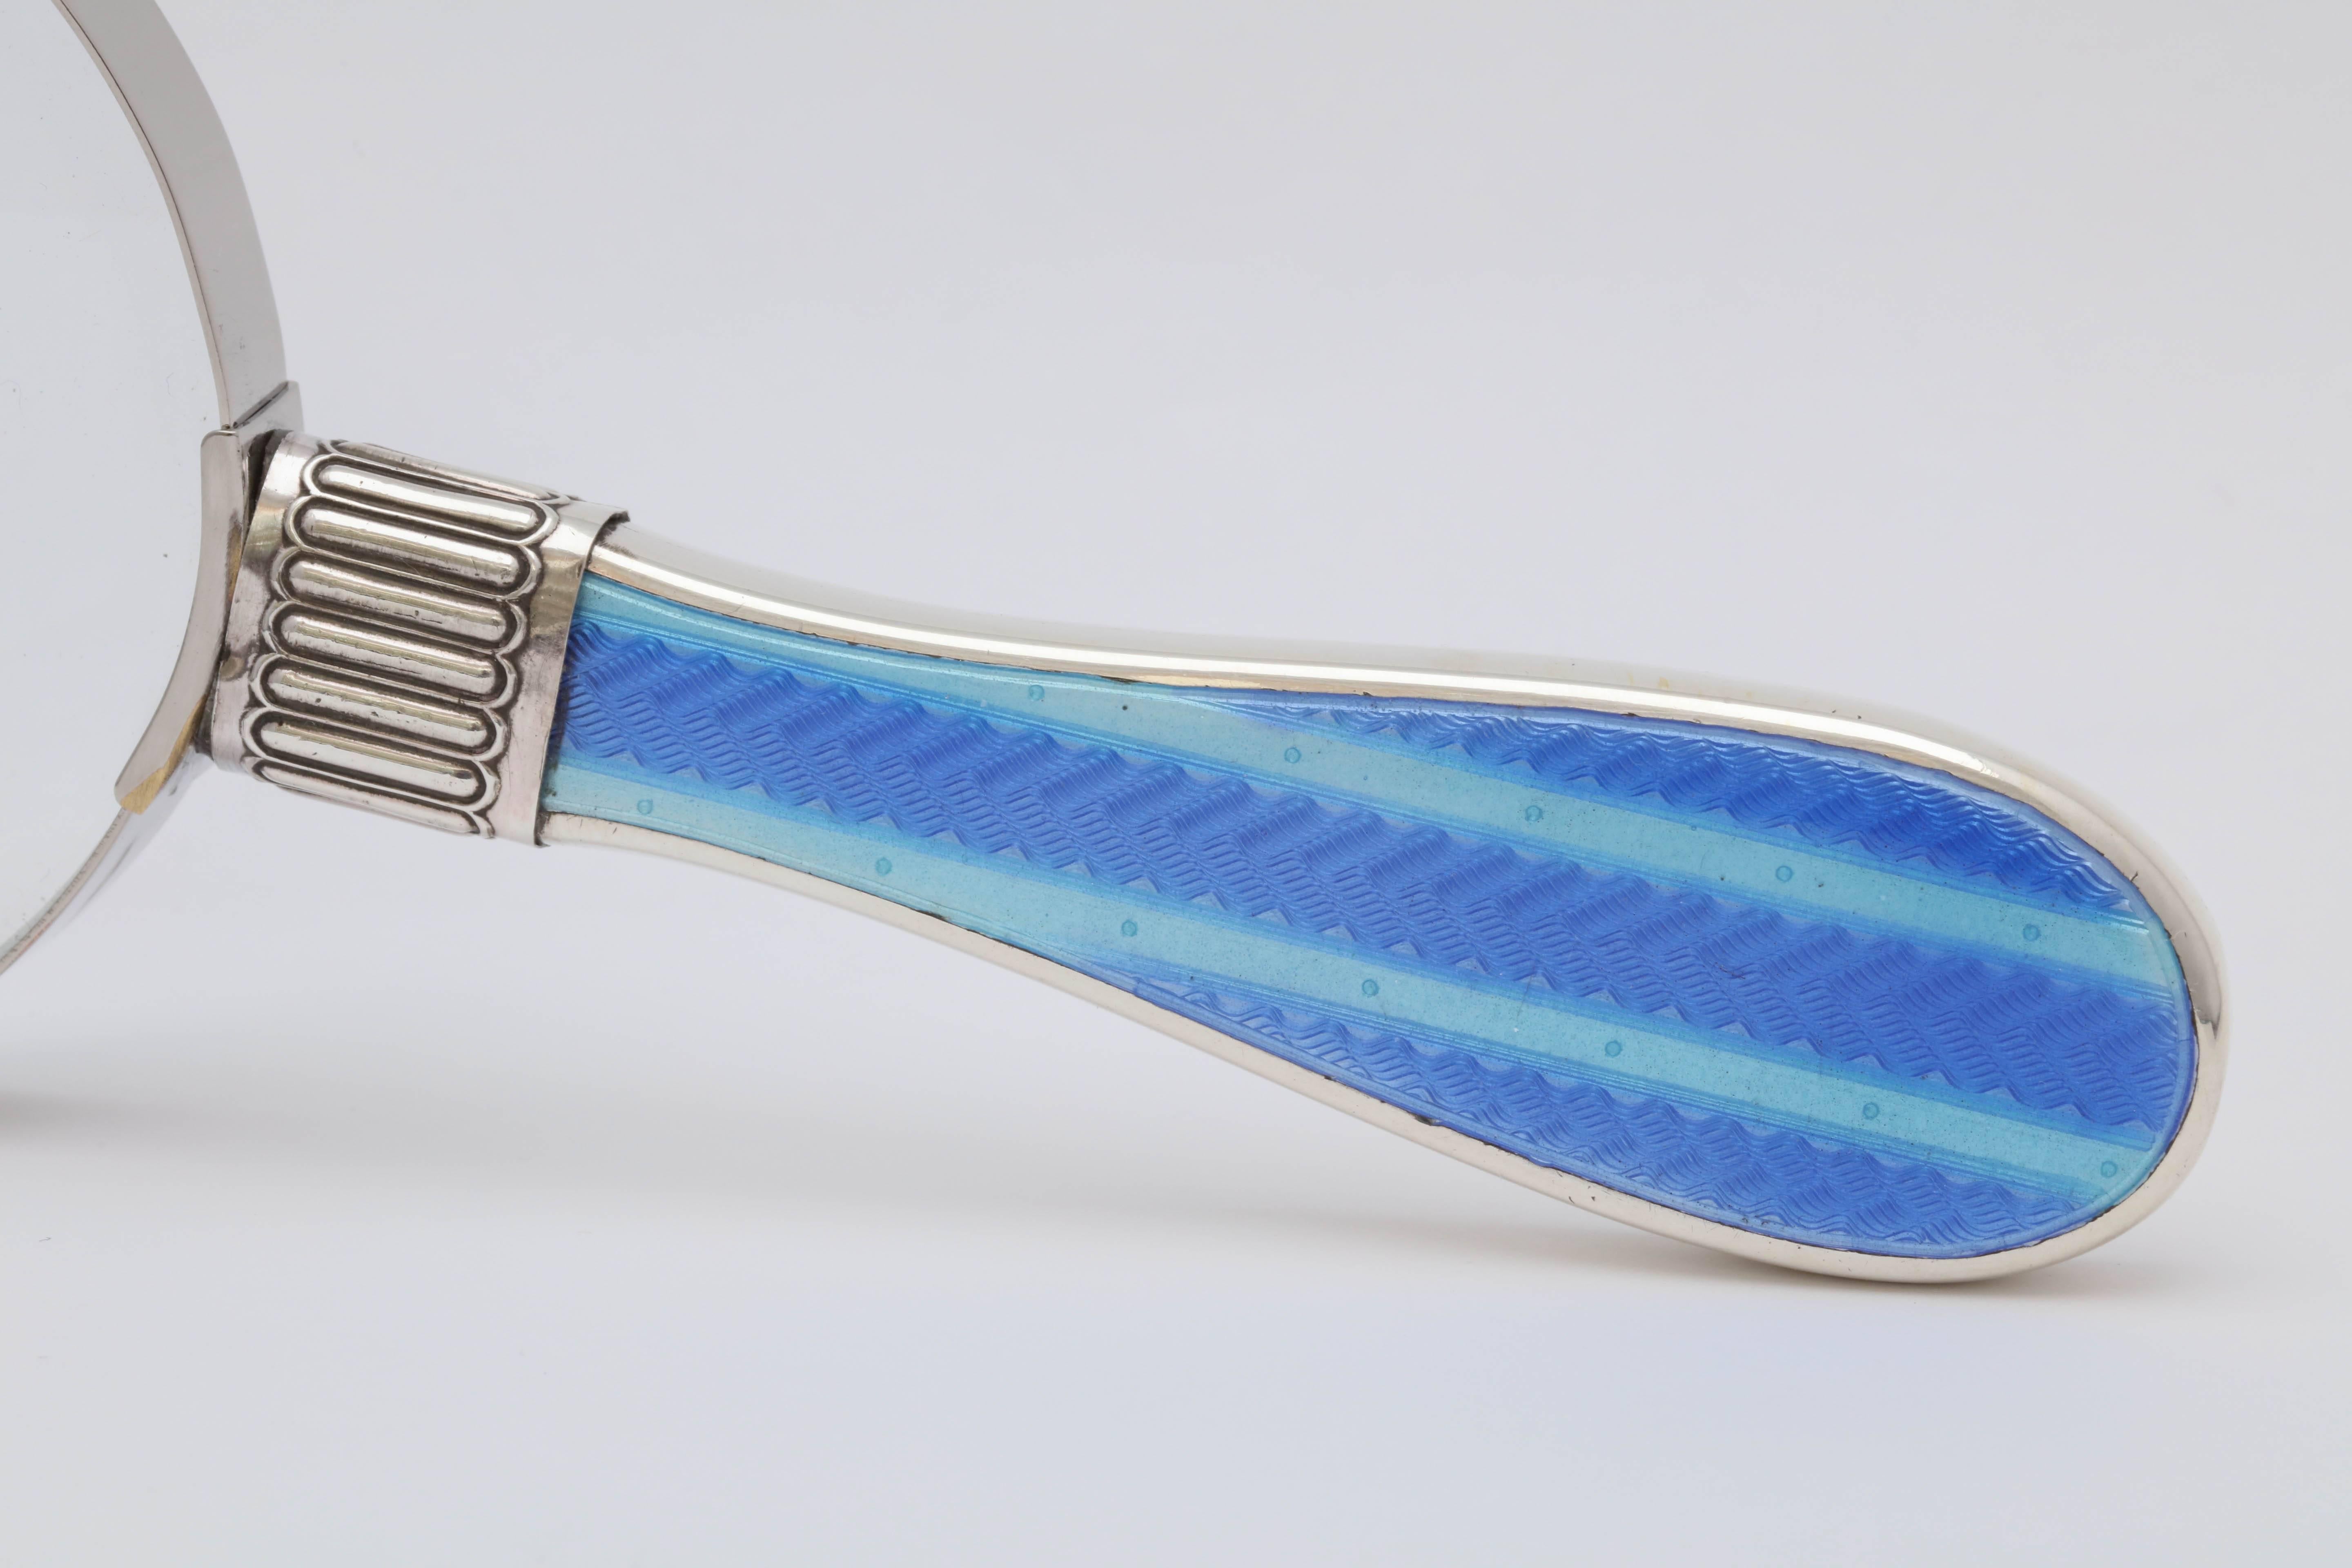 Unusual, Victorian, sterling silver and dark blue guilloche enamel - mounted magnifying glass, the dark blue enamel having lighter blue stripes, Sheffield, England, 1899, W. R. Humphreys - maker. Guilloche enamel that covers the sterling silver